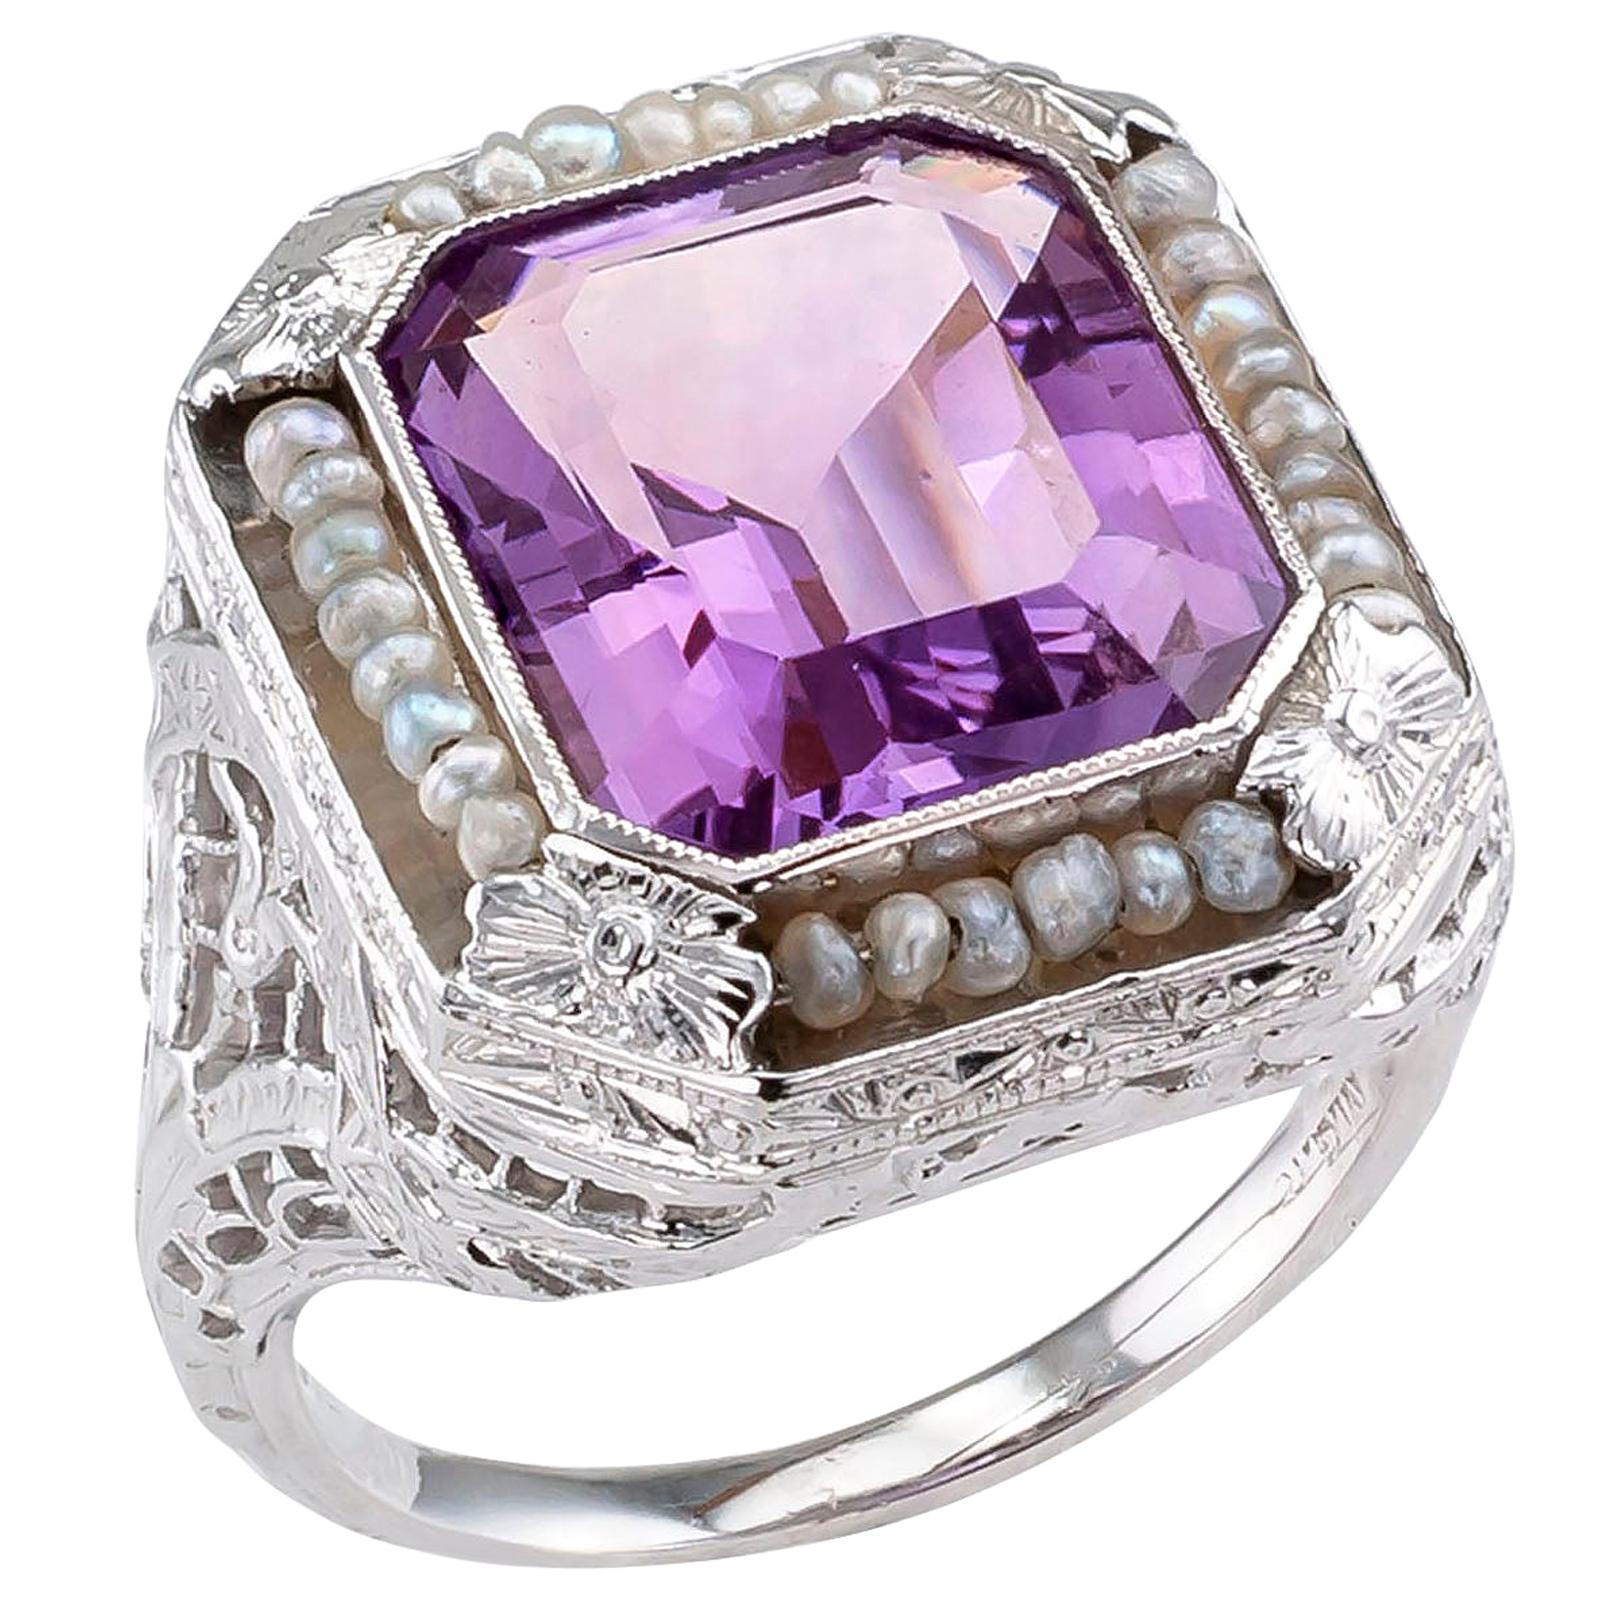 Art Deco Amethyst Seed Pearl White Gold Filigree Ring